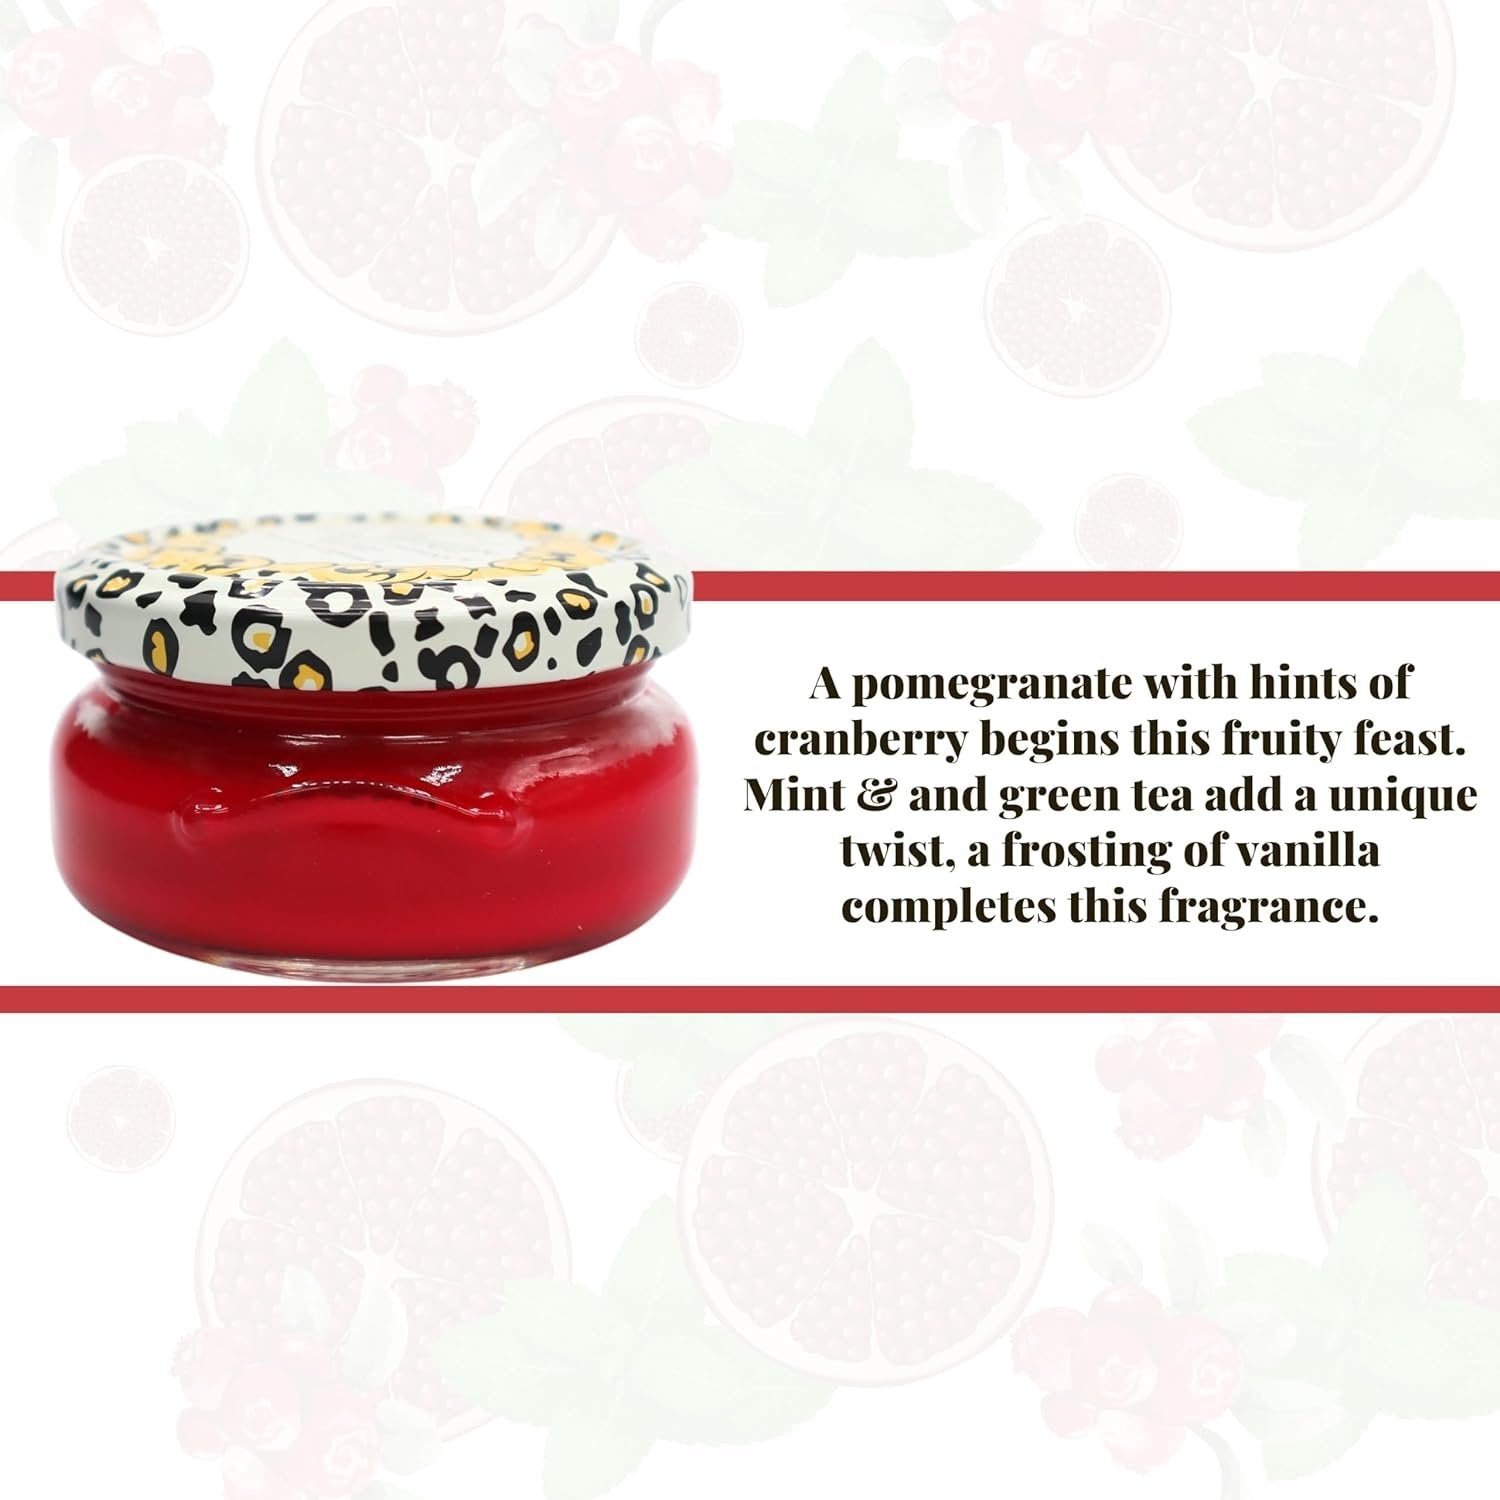 Tyler Candle Company Frosted Pomegranate Scented Candles - 3.4 oz - Burn Time Up to 25hrs